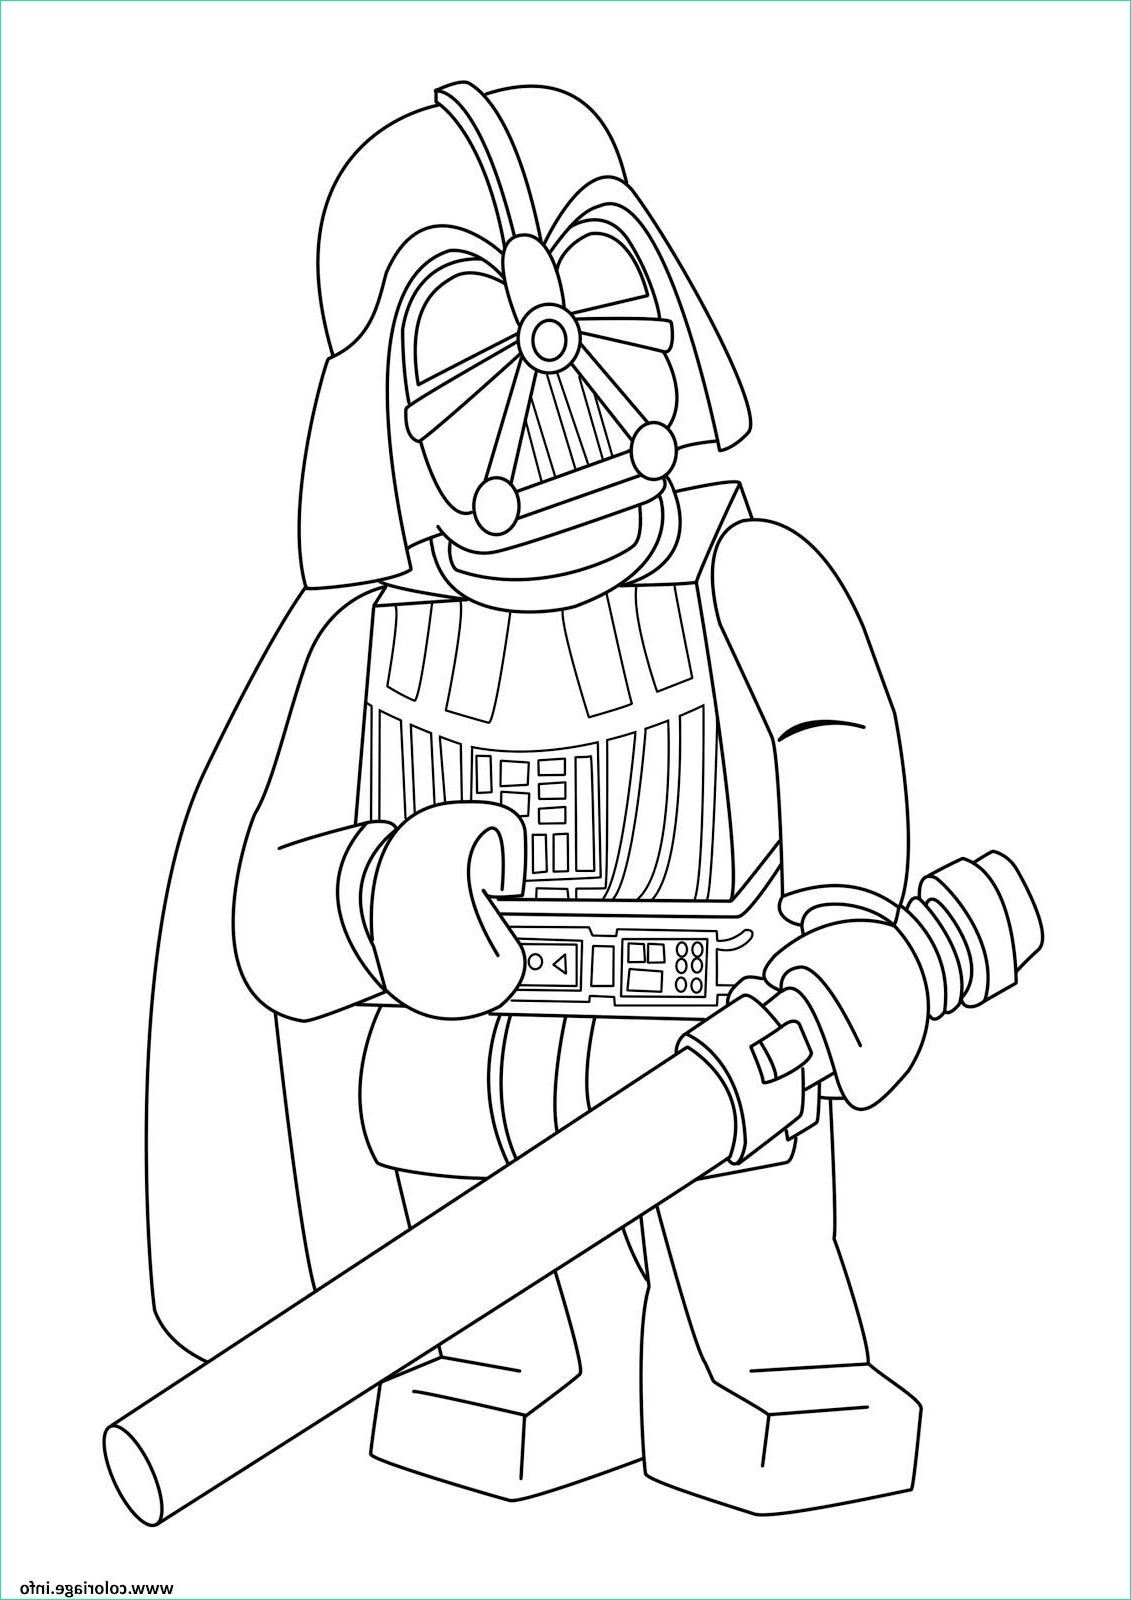 Coloriage Star Wars Lego Cool Stock Coloriage Lego Star Wars 3 Online Jecolorie